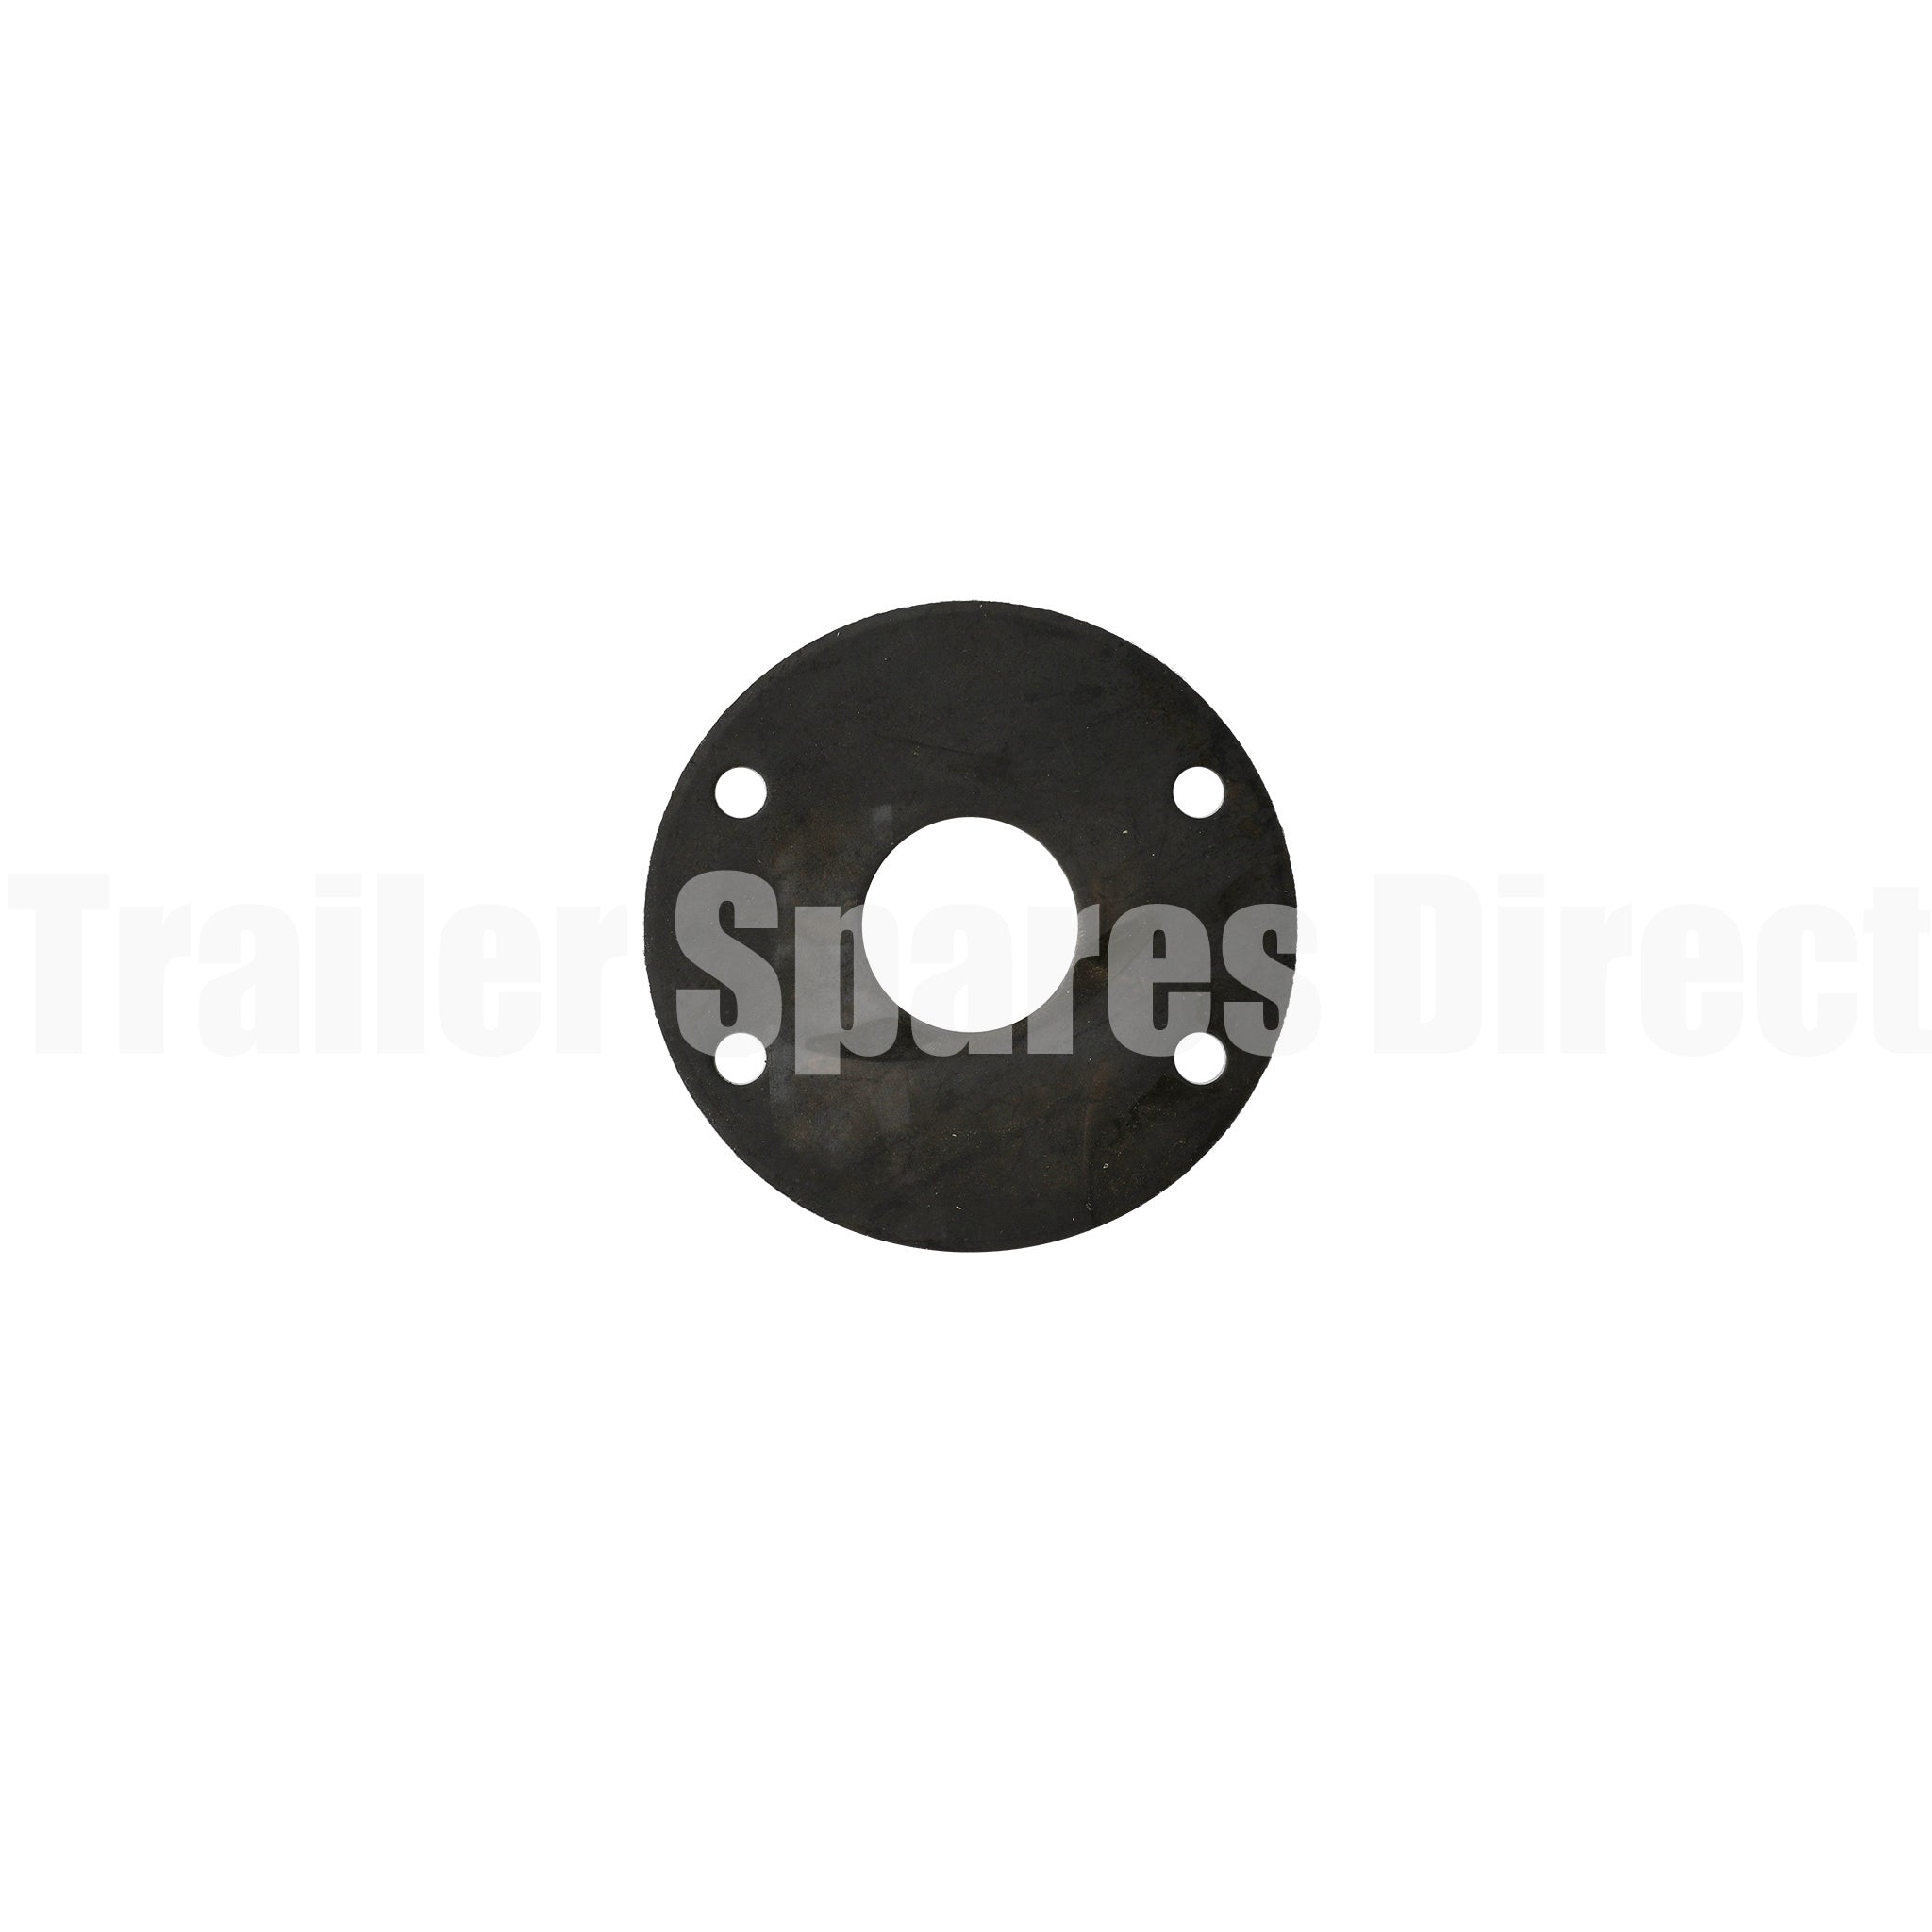 Weld-on mounting plate for 9 inch hydraulic brake - pick axle size